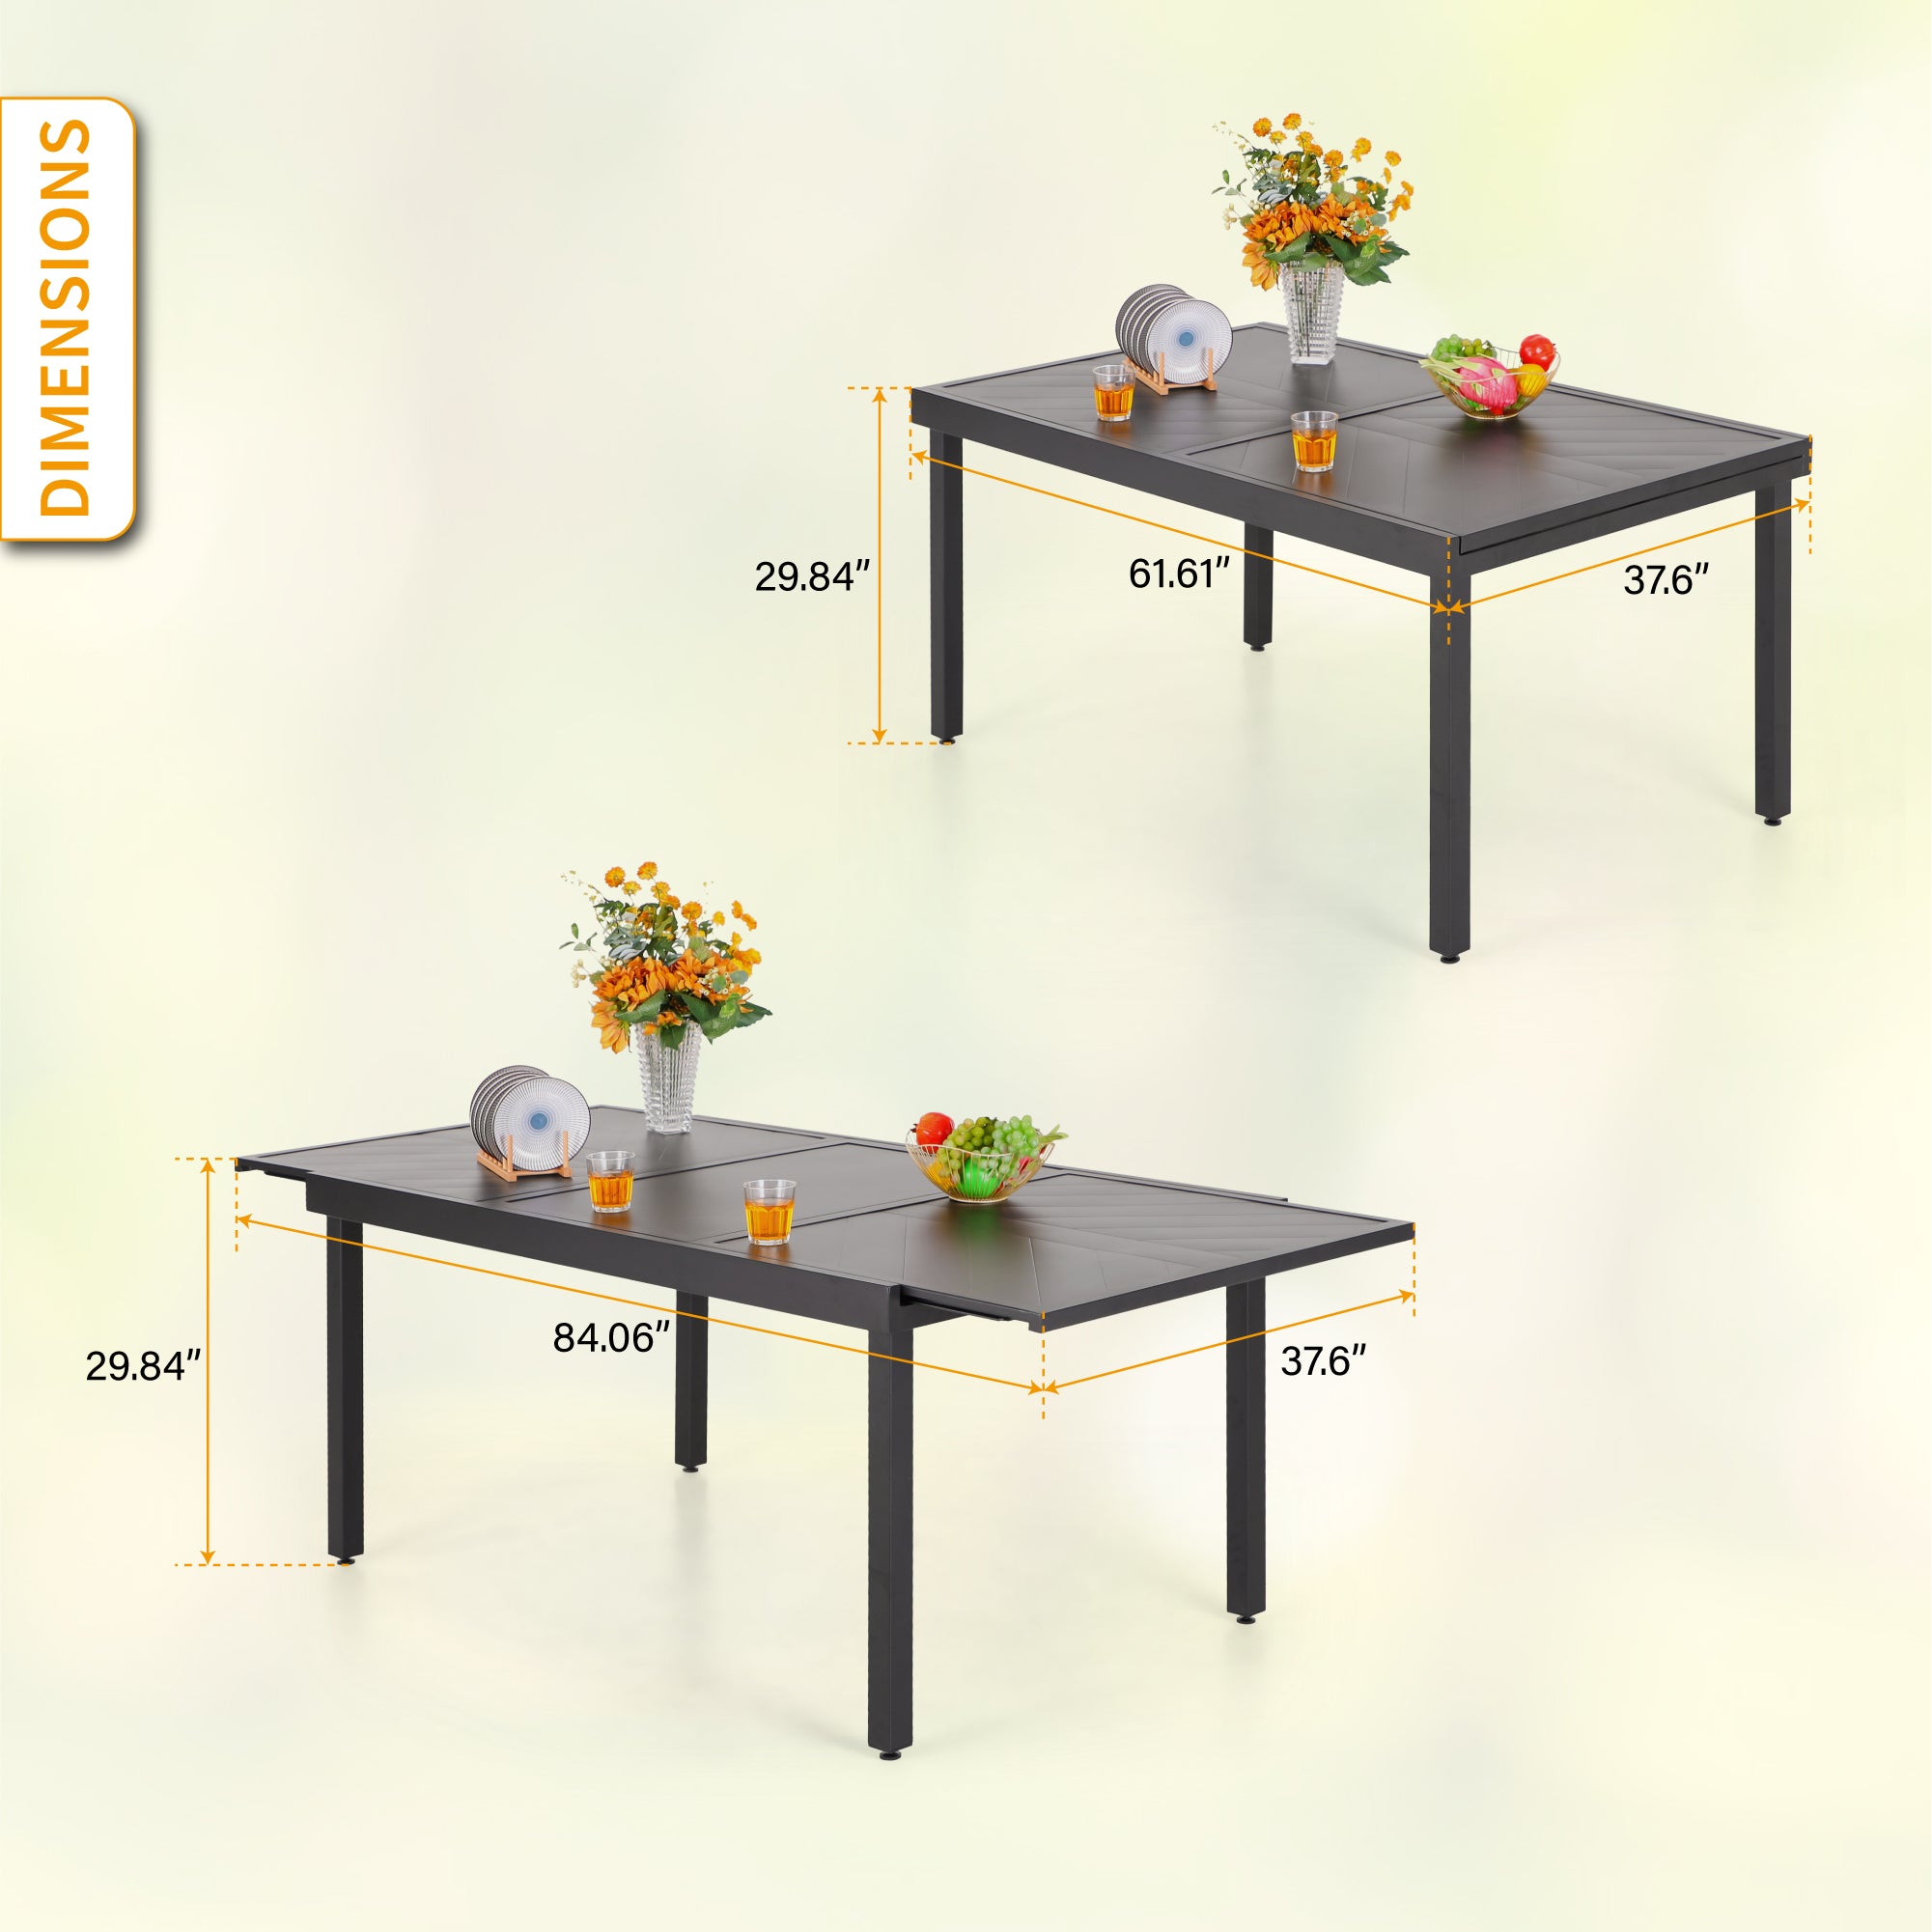 PHI VILLA 9/7-Piece Patio Dining Set Line-engraved Expandable Table & Padded High-back Textilene C-spring Chairs